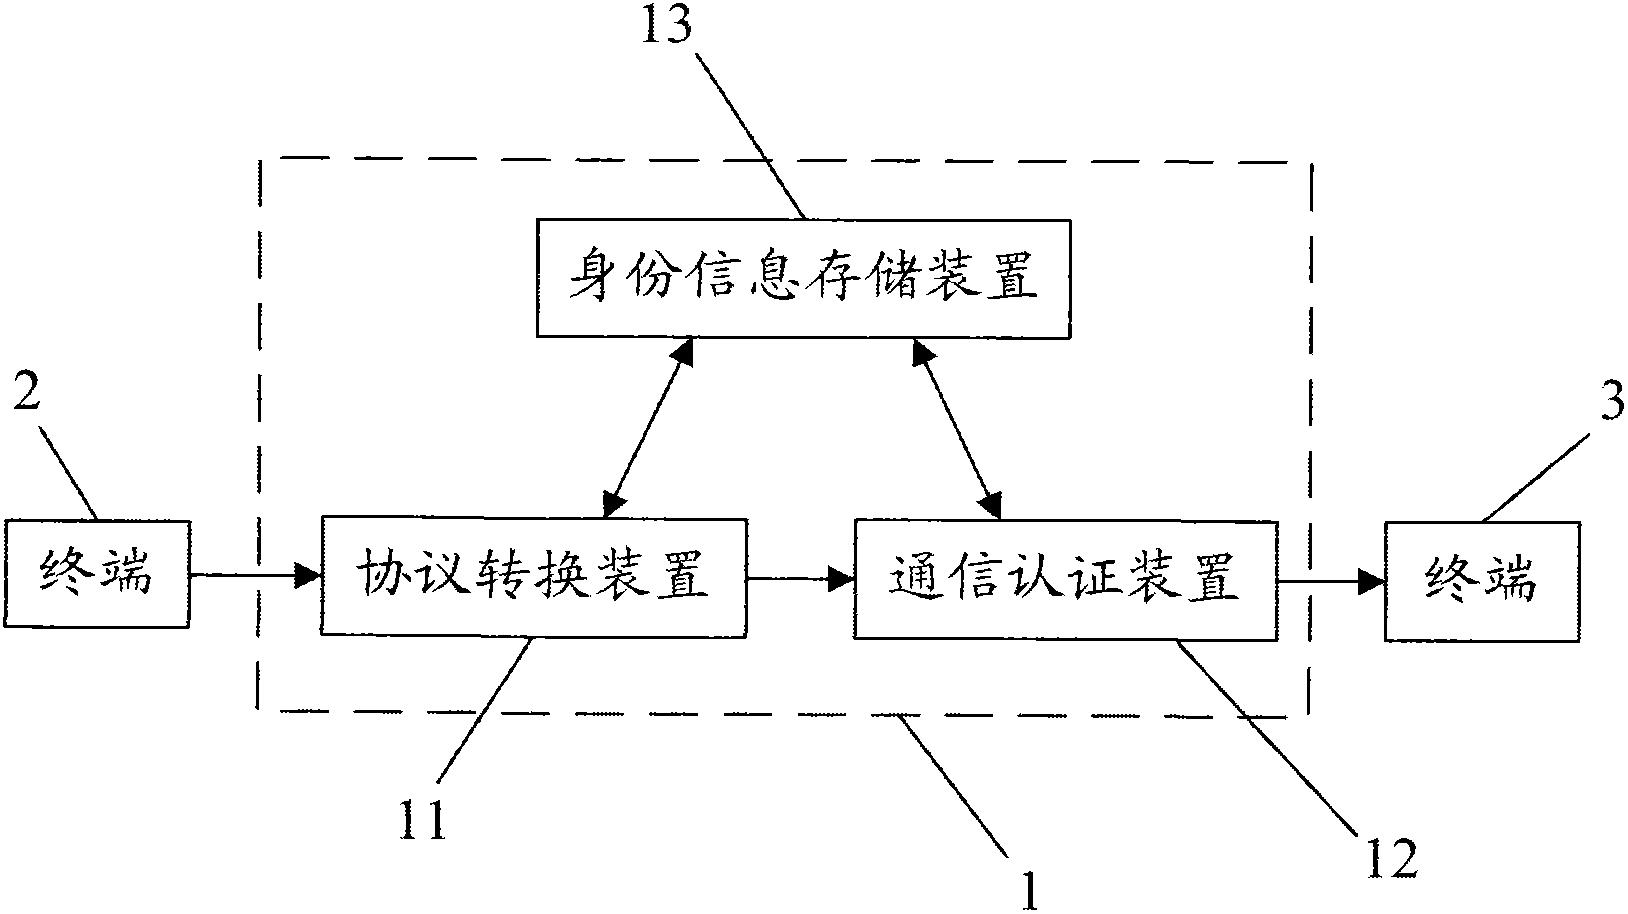 Communication system of terminals interconnected among different networks